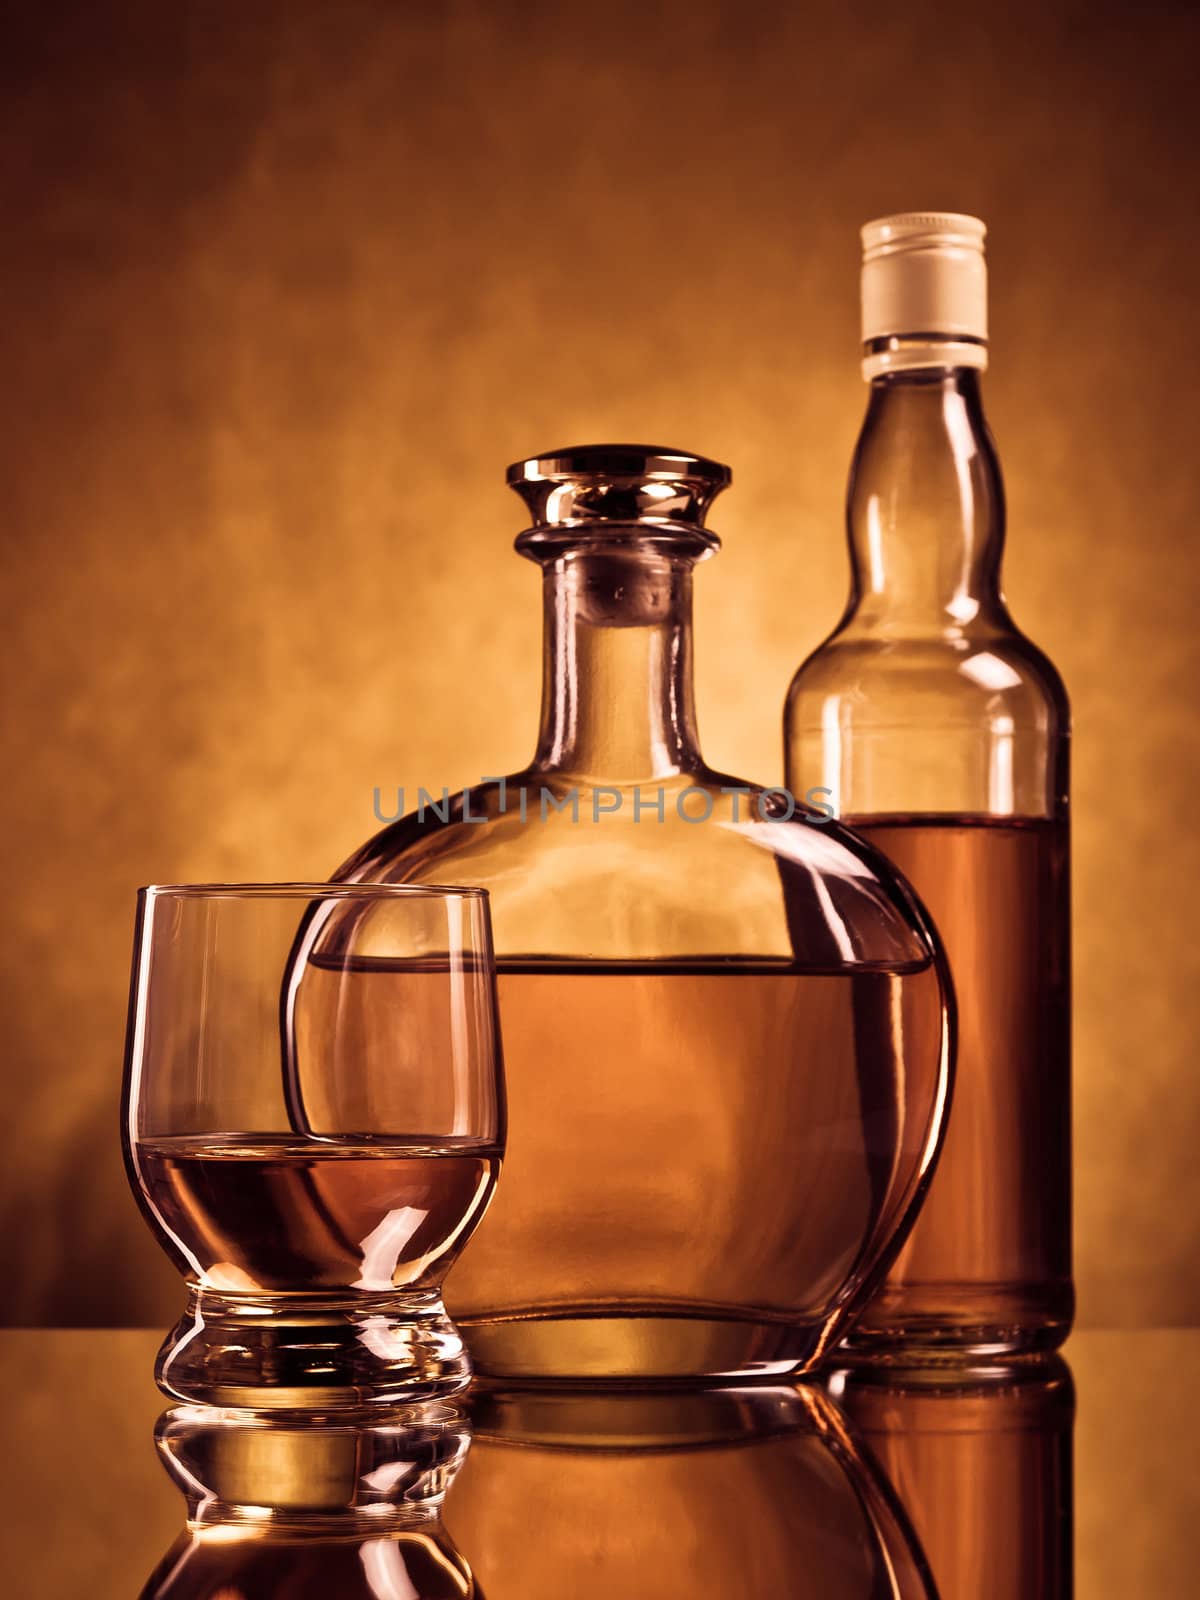 Two bottles of alcohol and a glass on brown grunge background